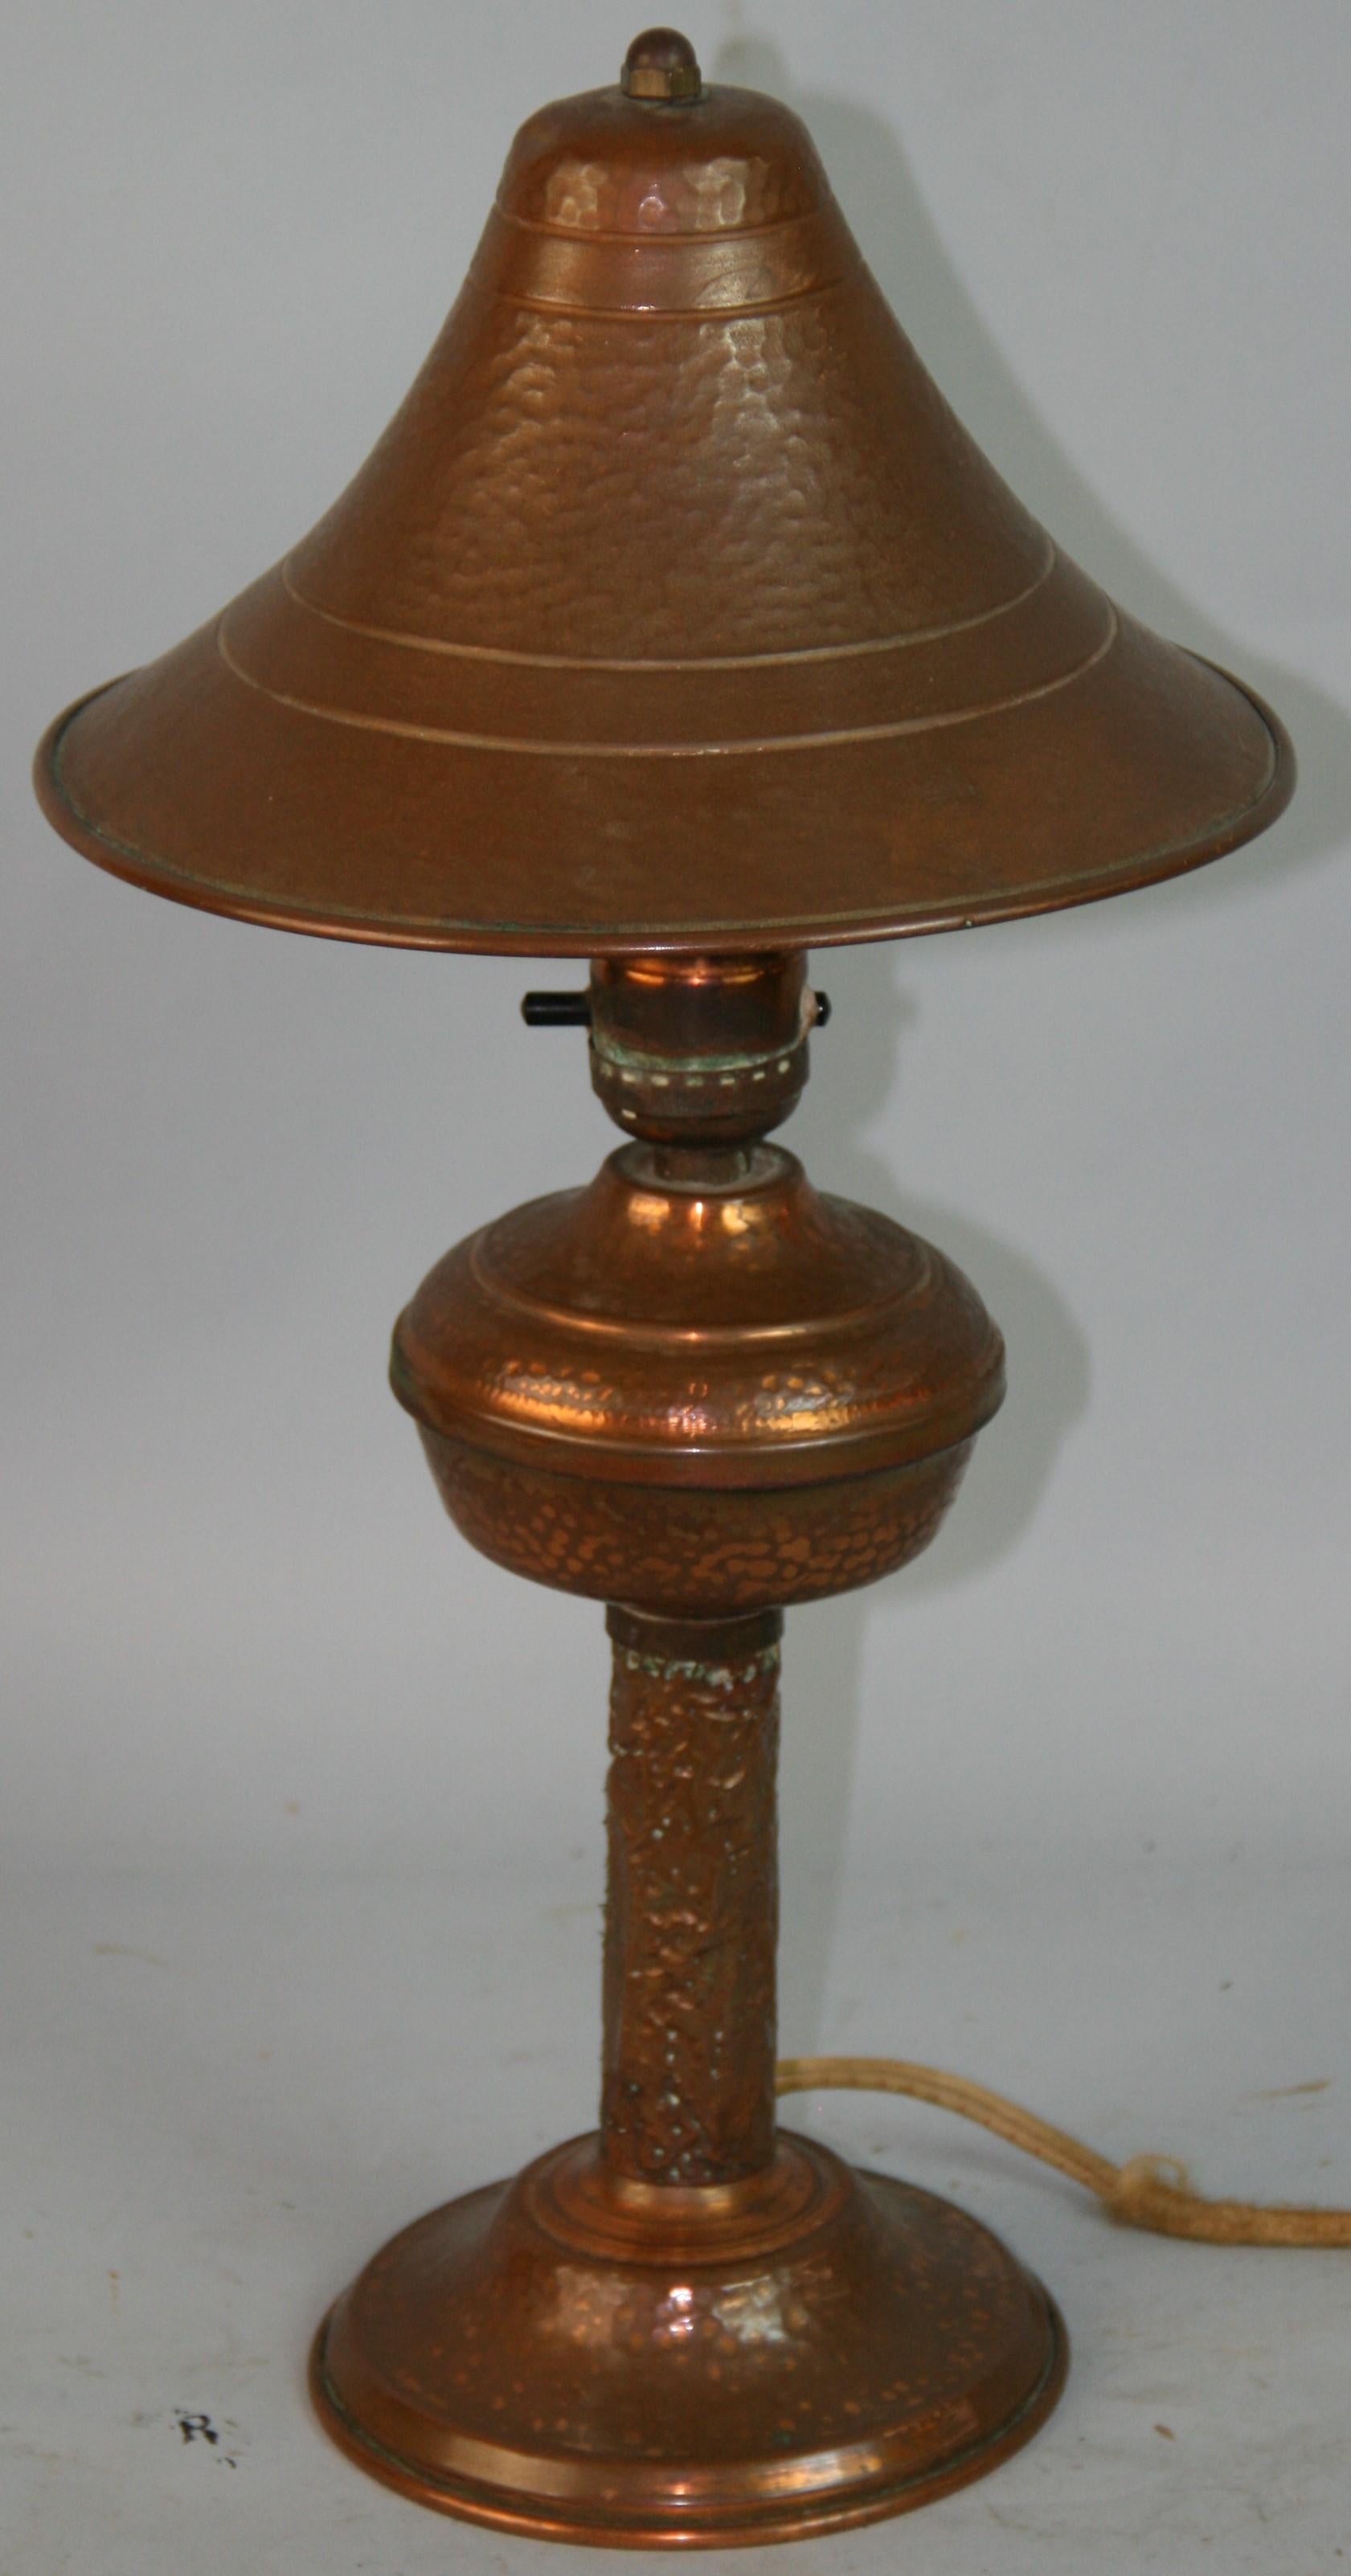 1272 Arts and Craft copper lamp with copper socket and original cloth covered wiring.